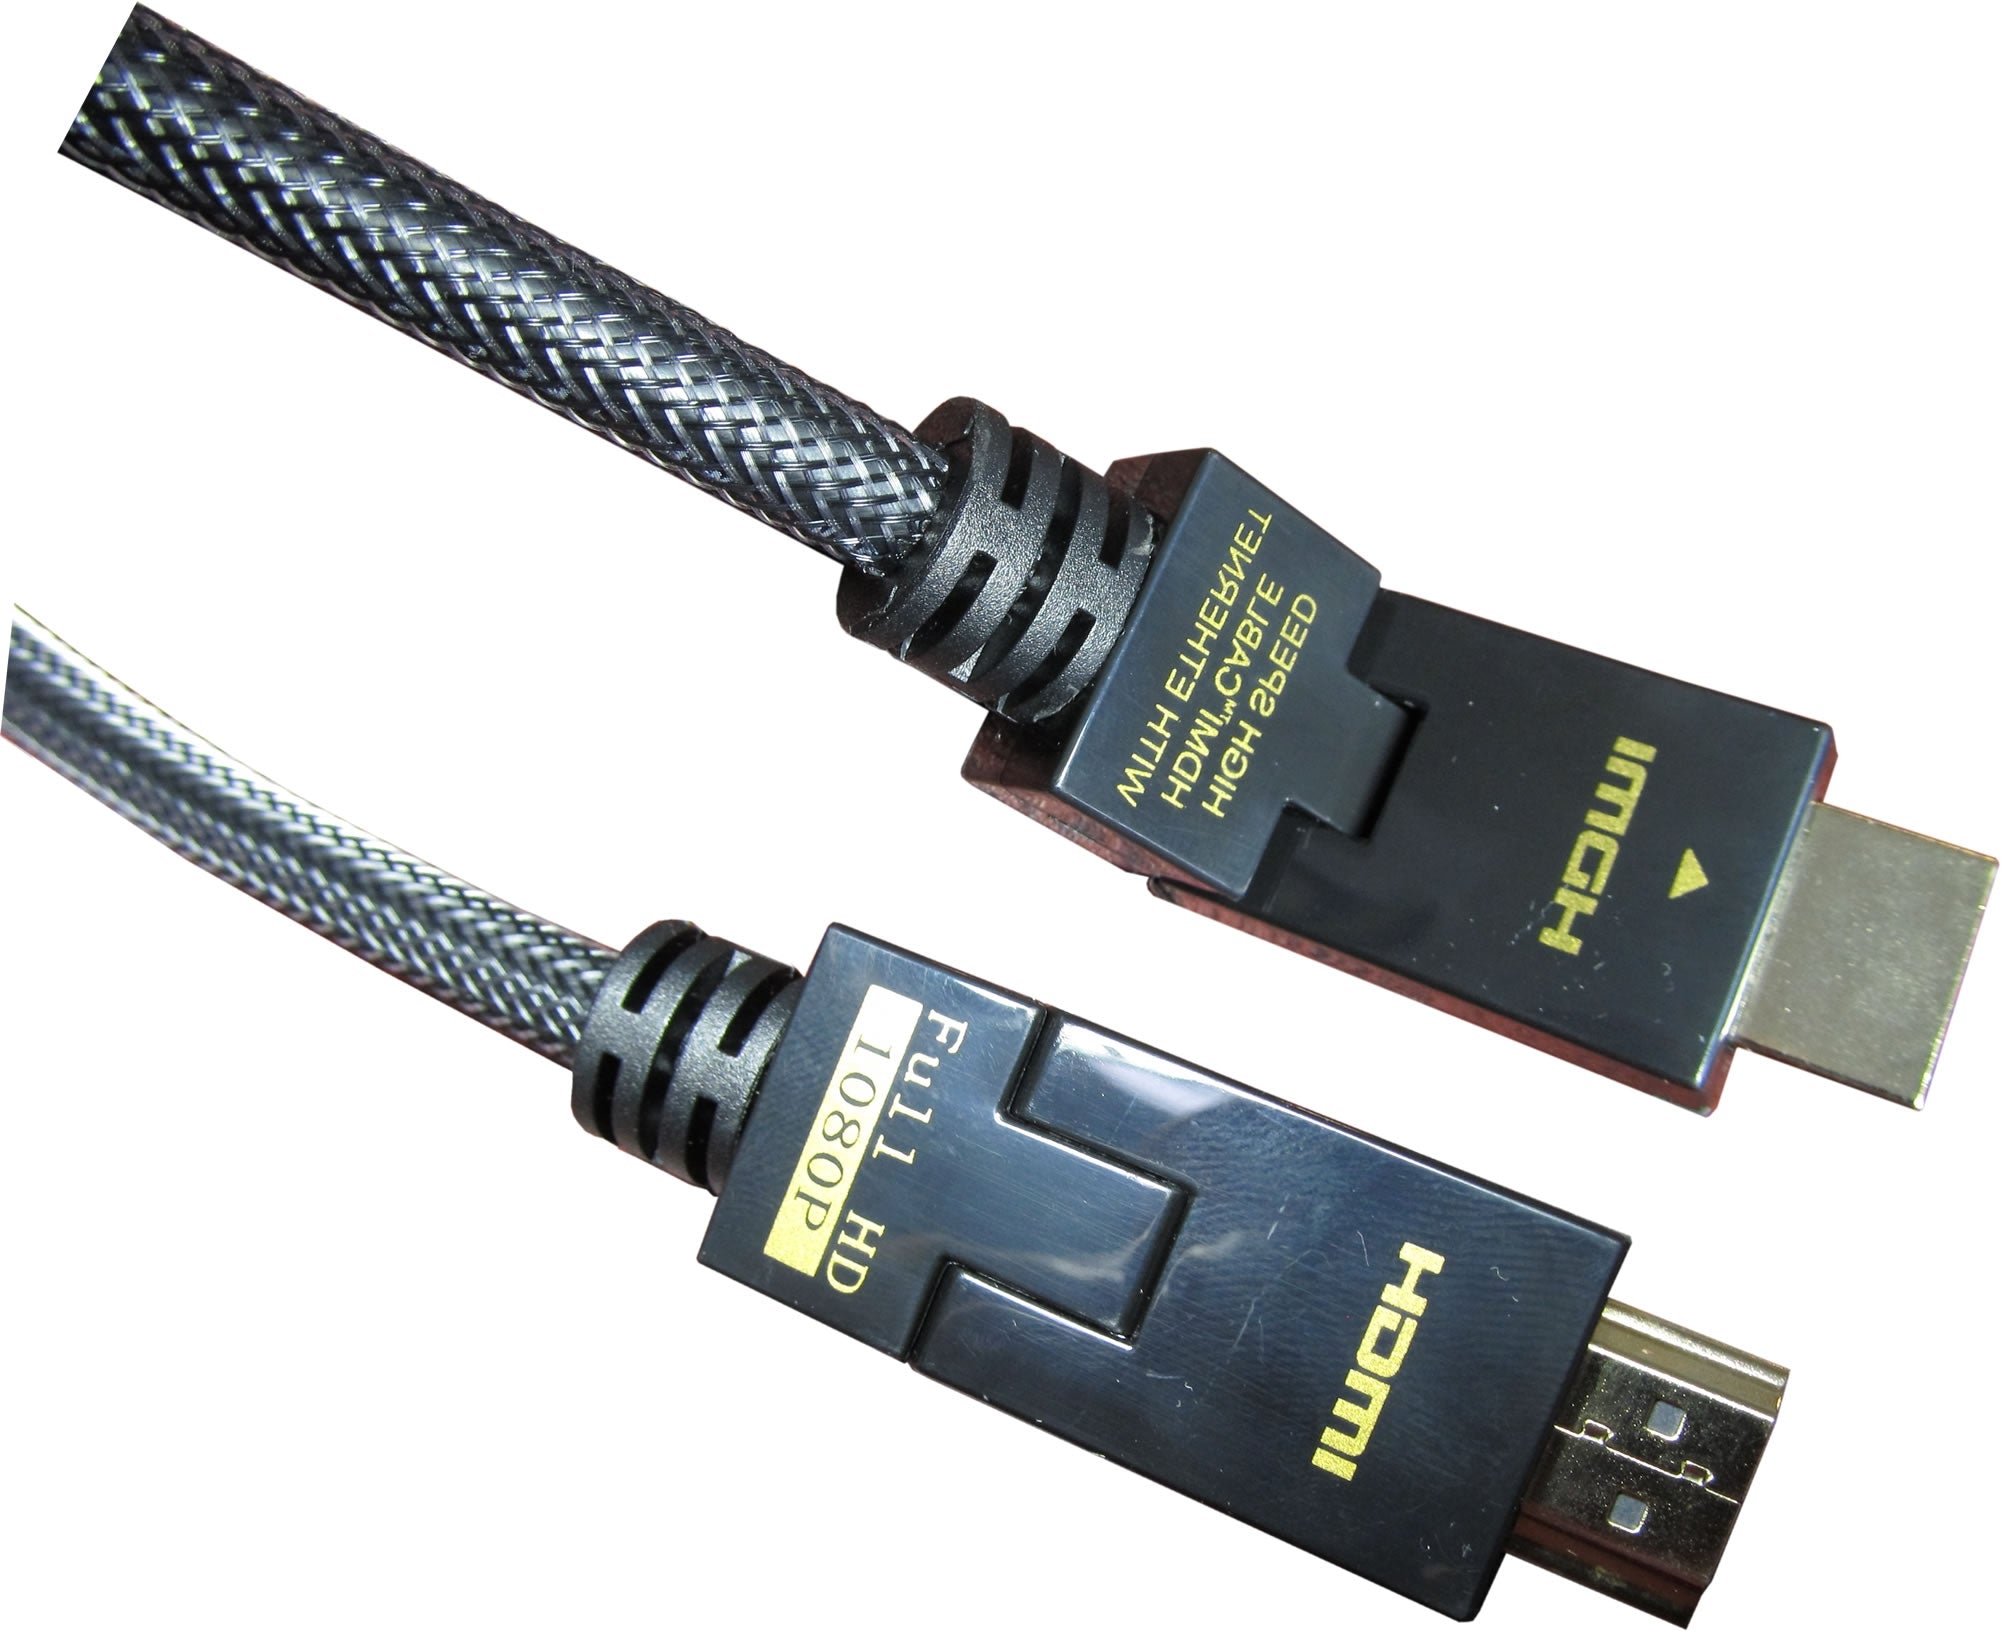 16-6325-06 HDMI High Speed Swivel Cable 4K 3D HDMI Cable version 1.4 - 6 Ft